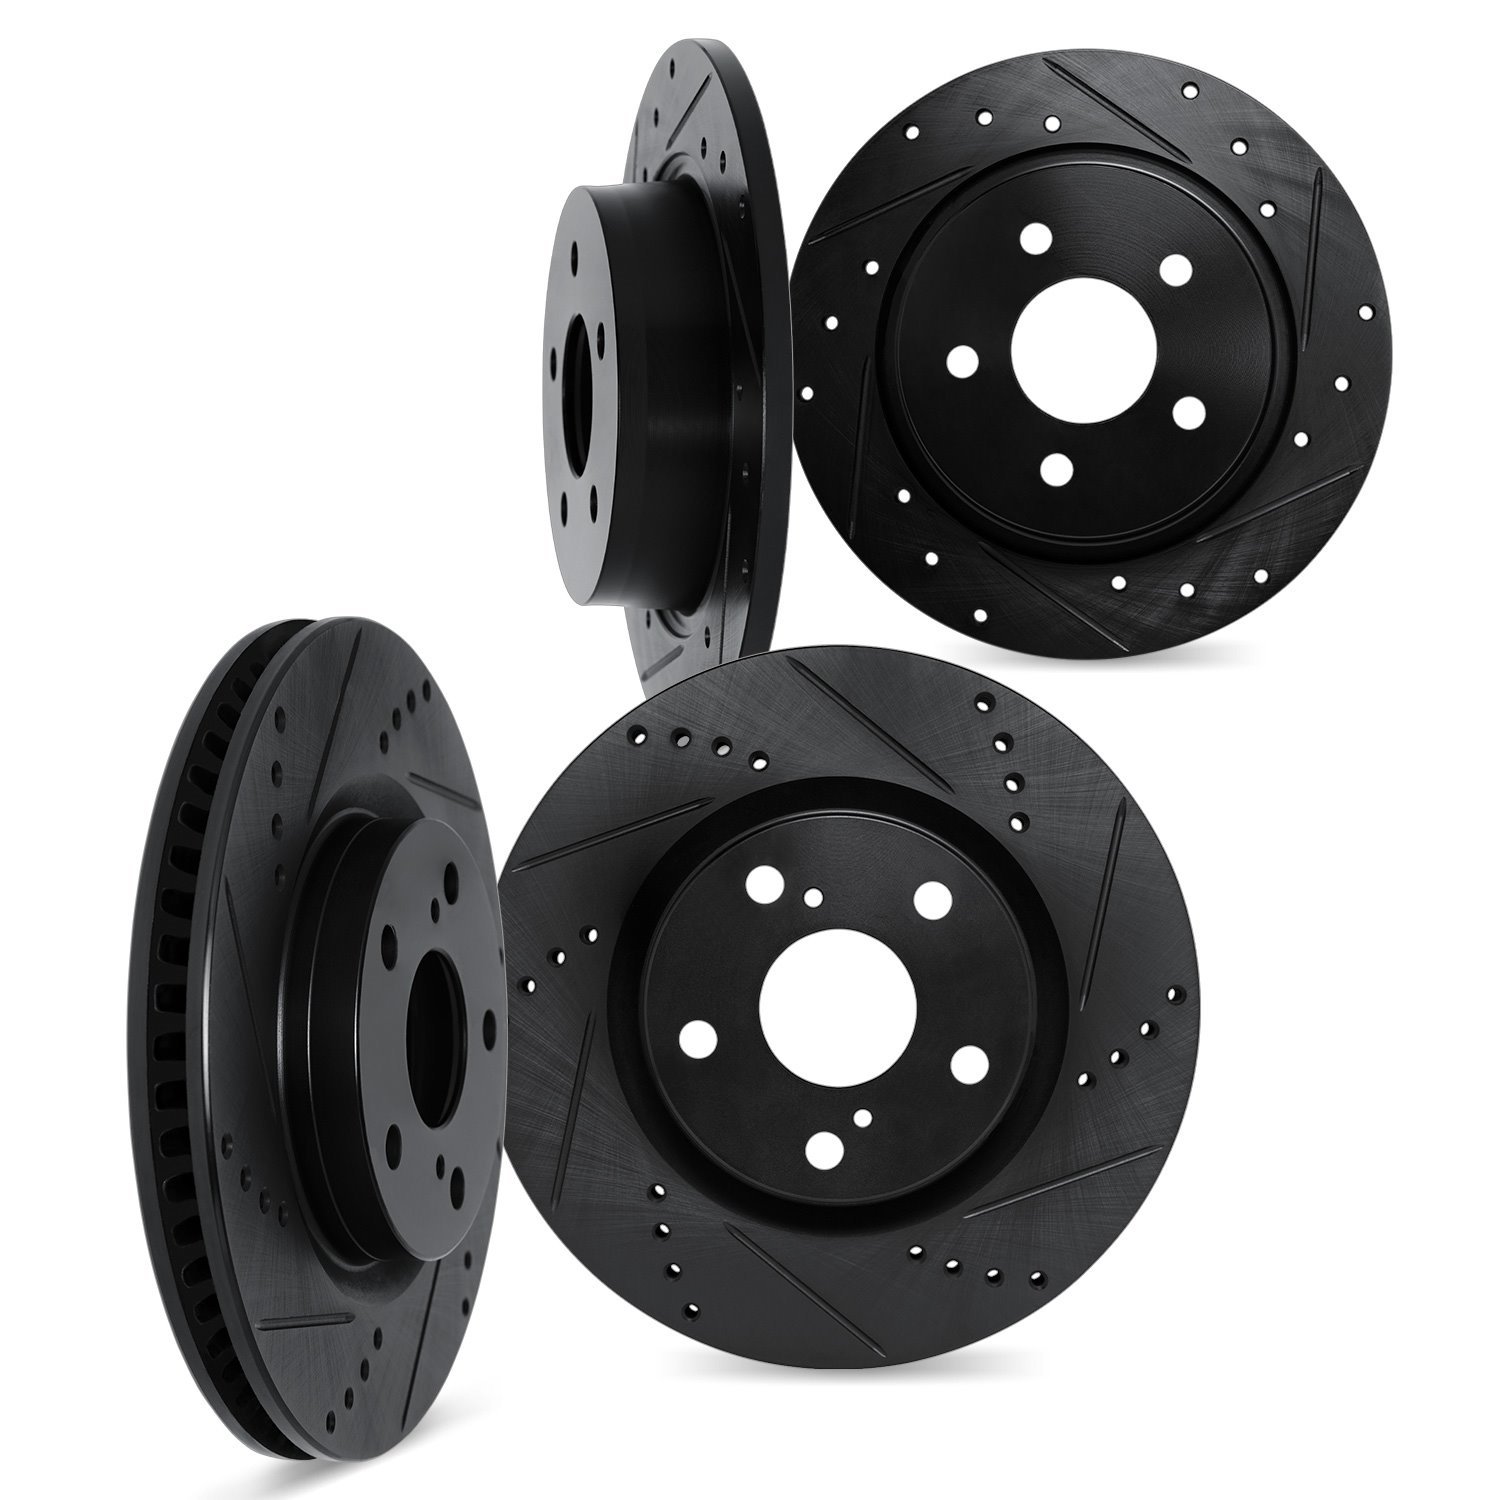 8004-67122 Drilled/Slotted Brake Rotors [Black], Fits Select Infiniti/Nissan, Position: Front and Rear